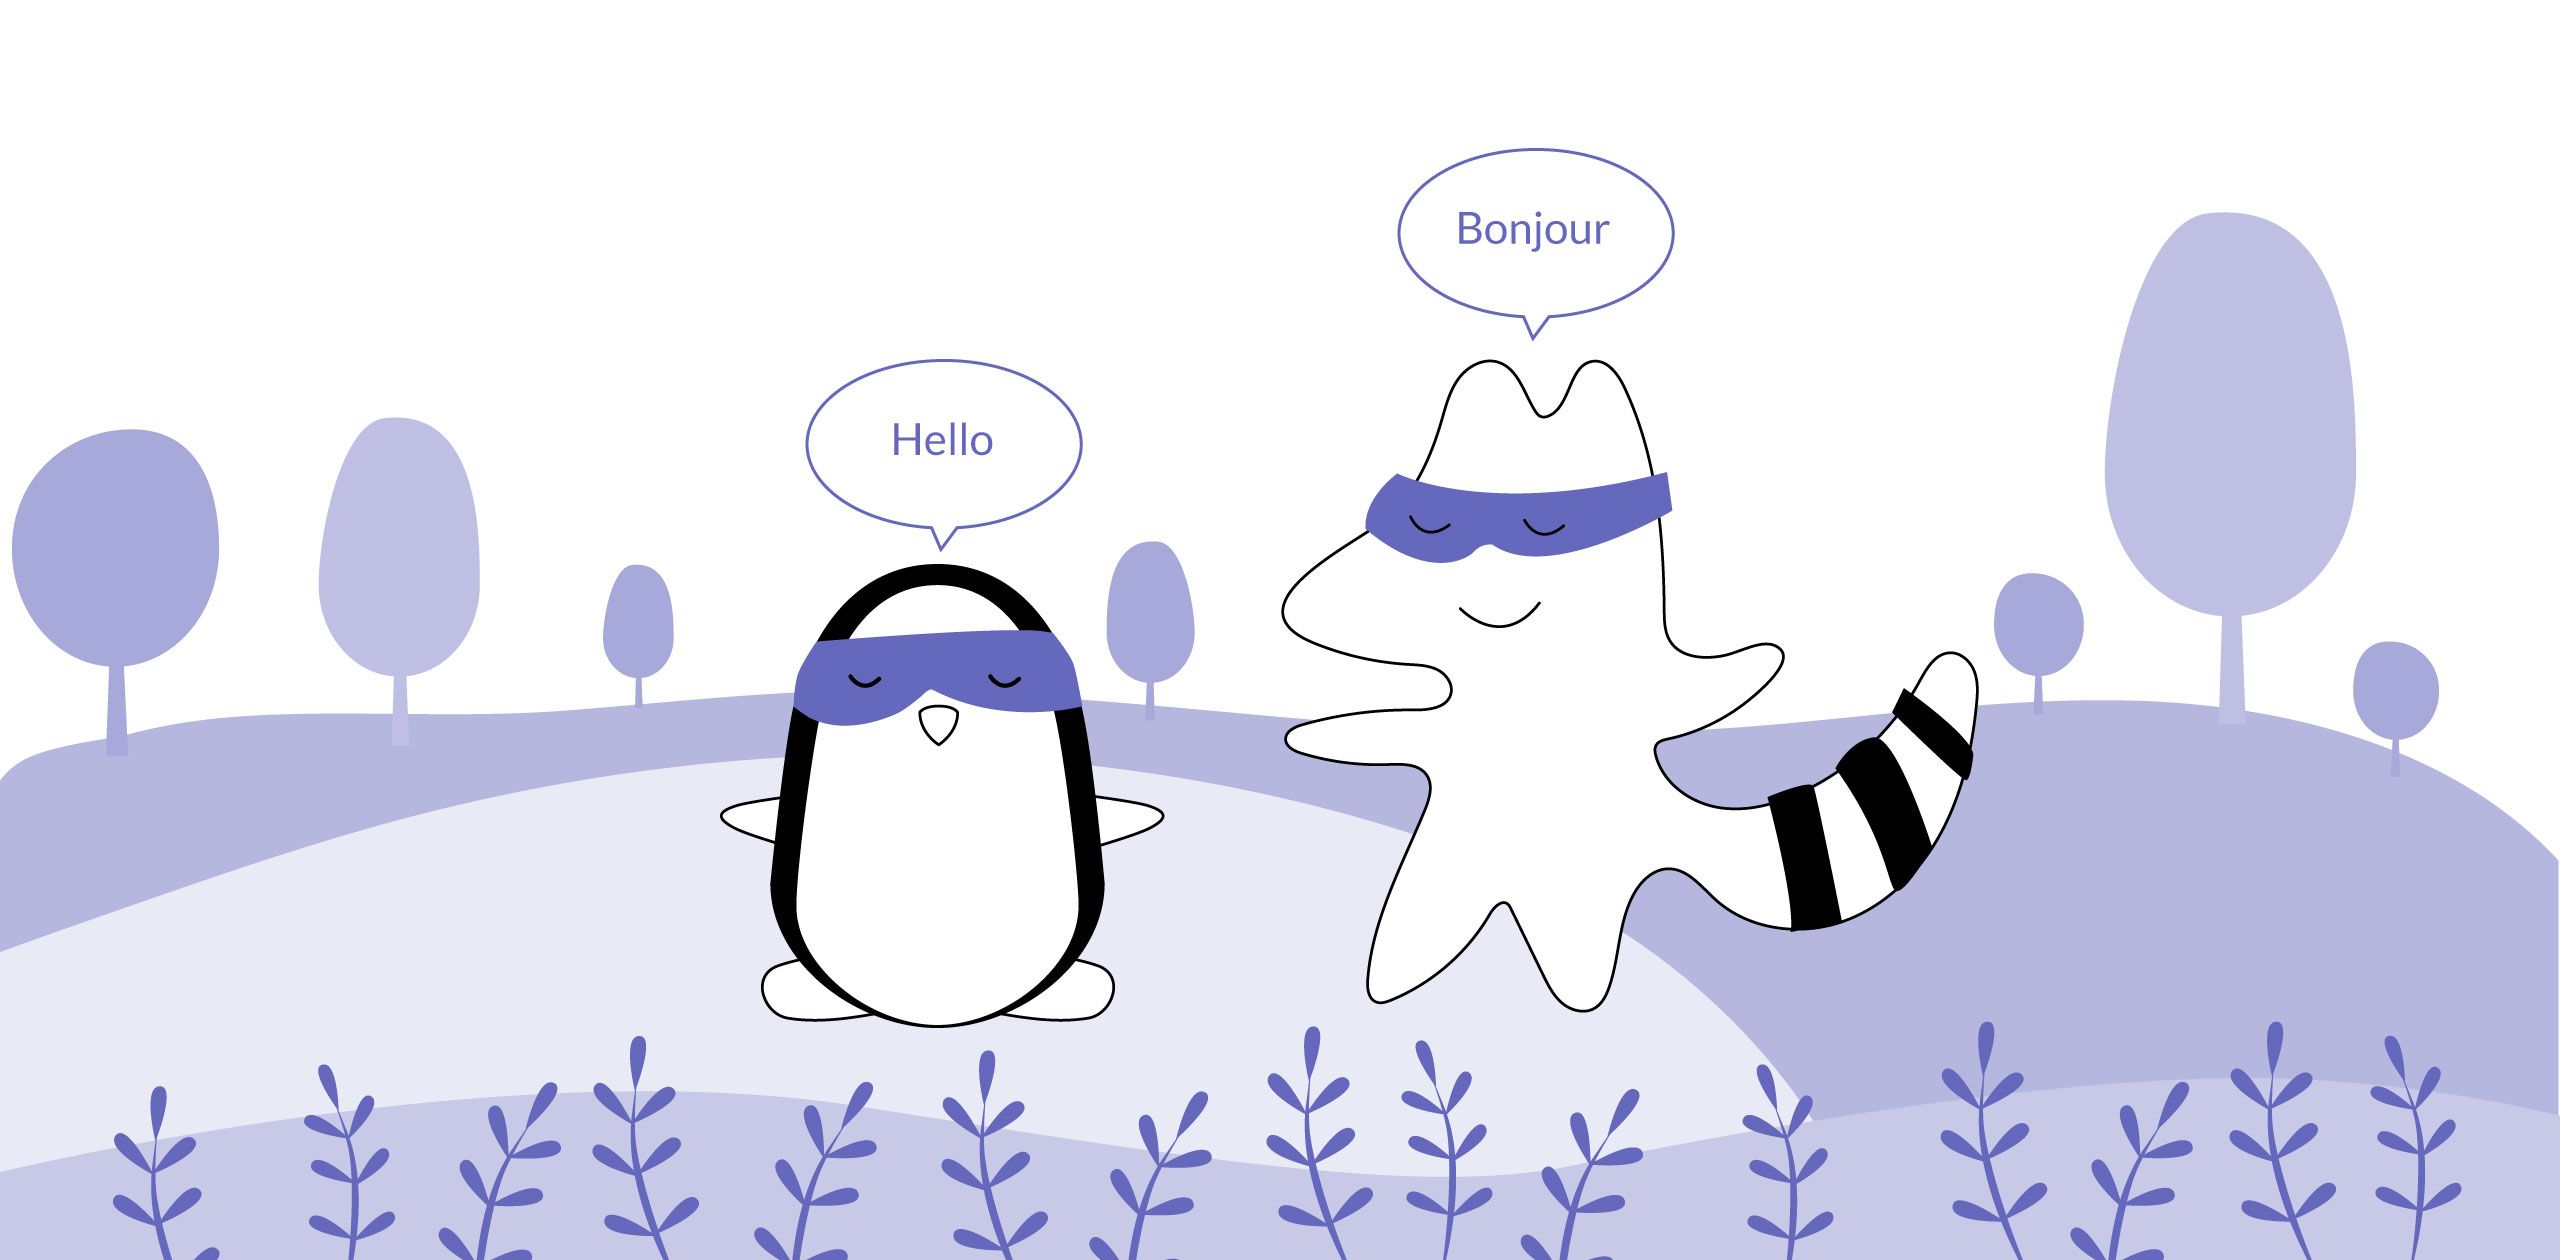 Hello in French